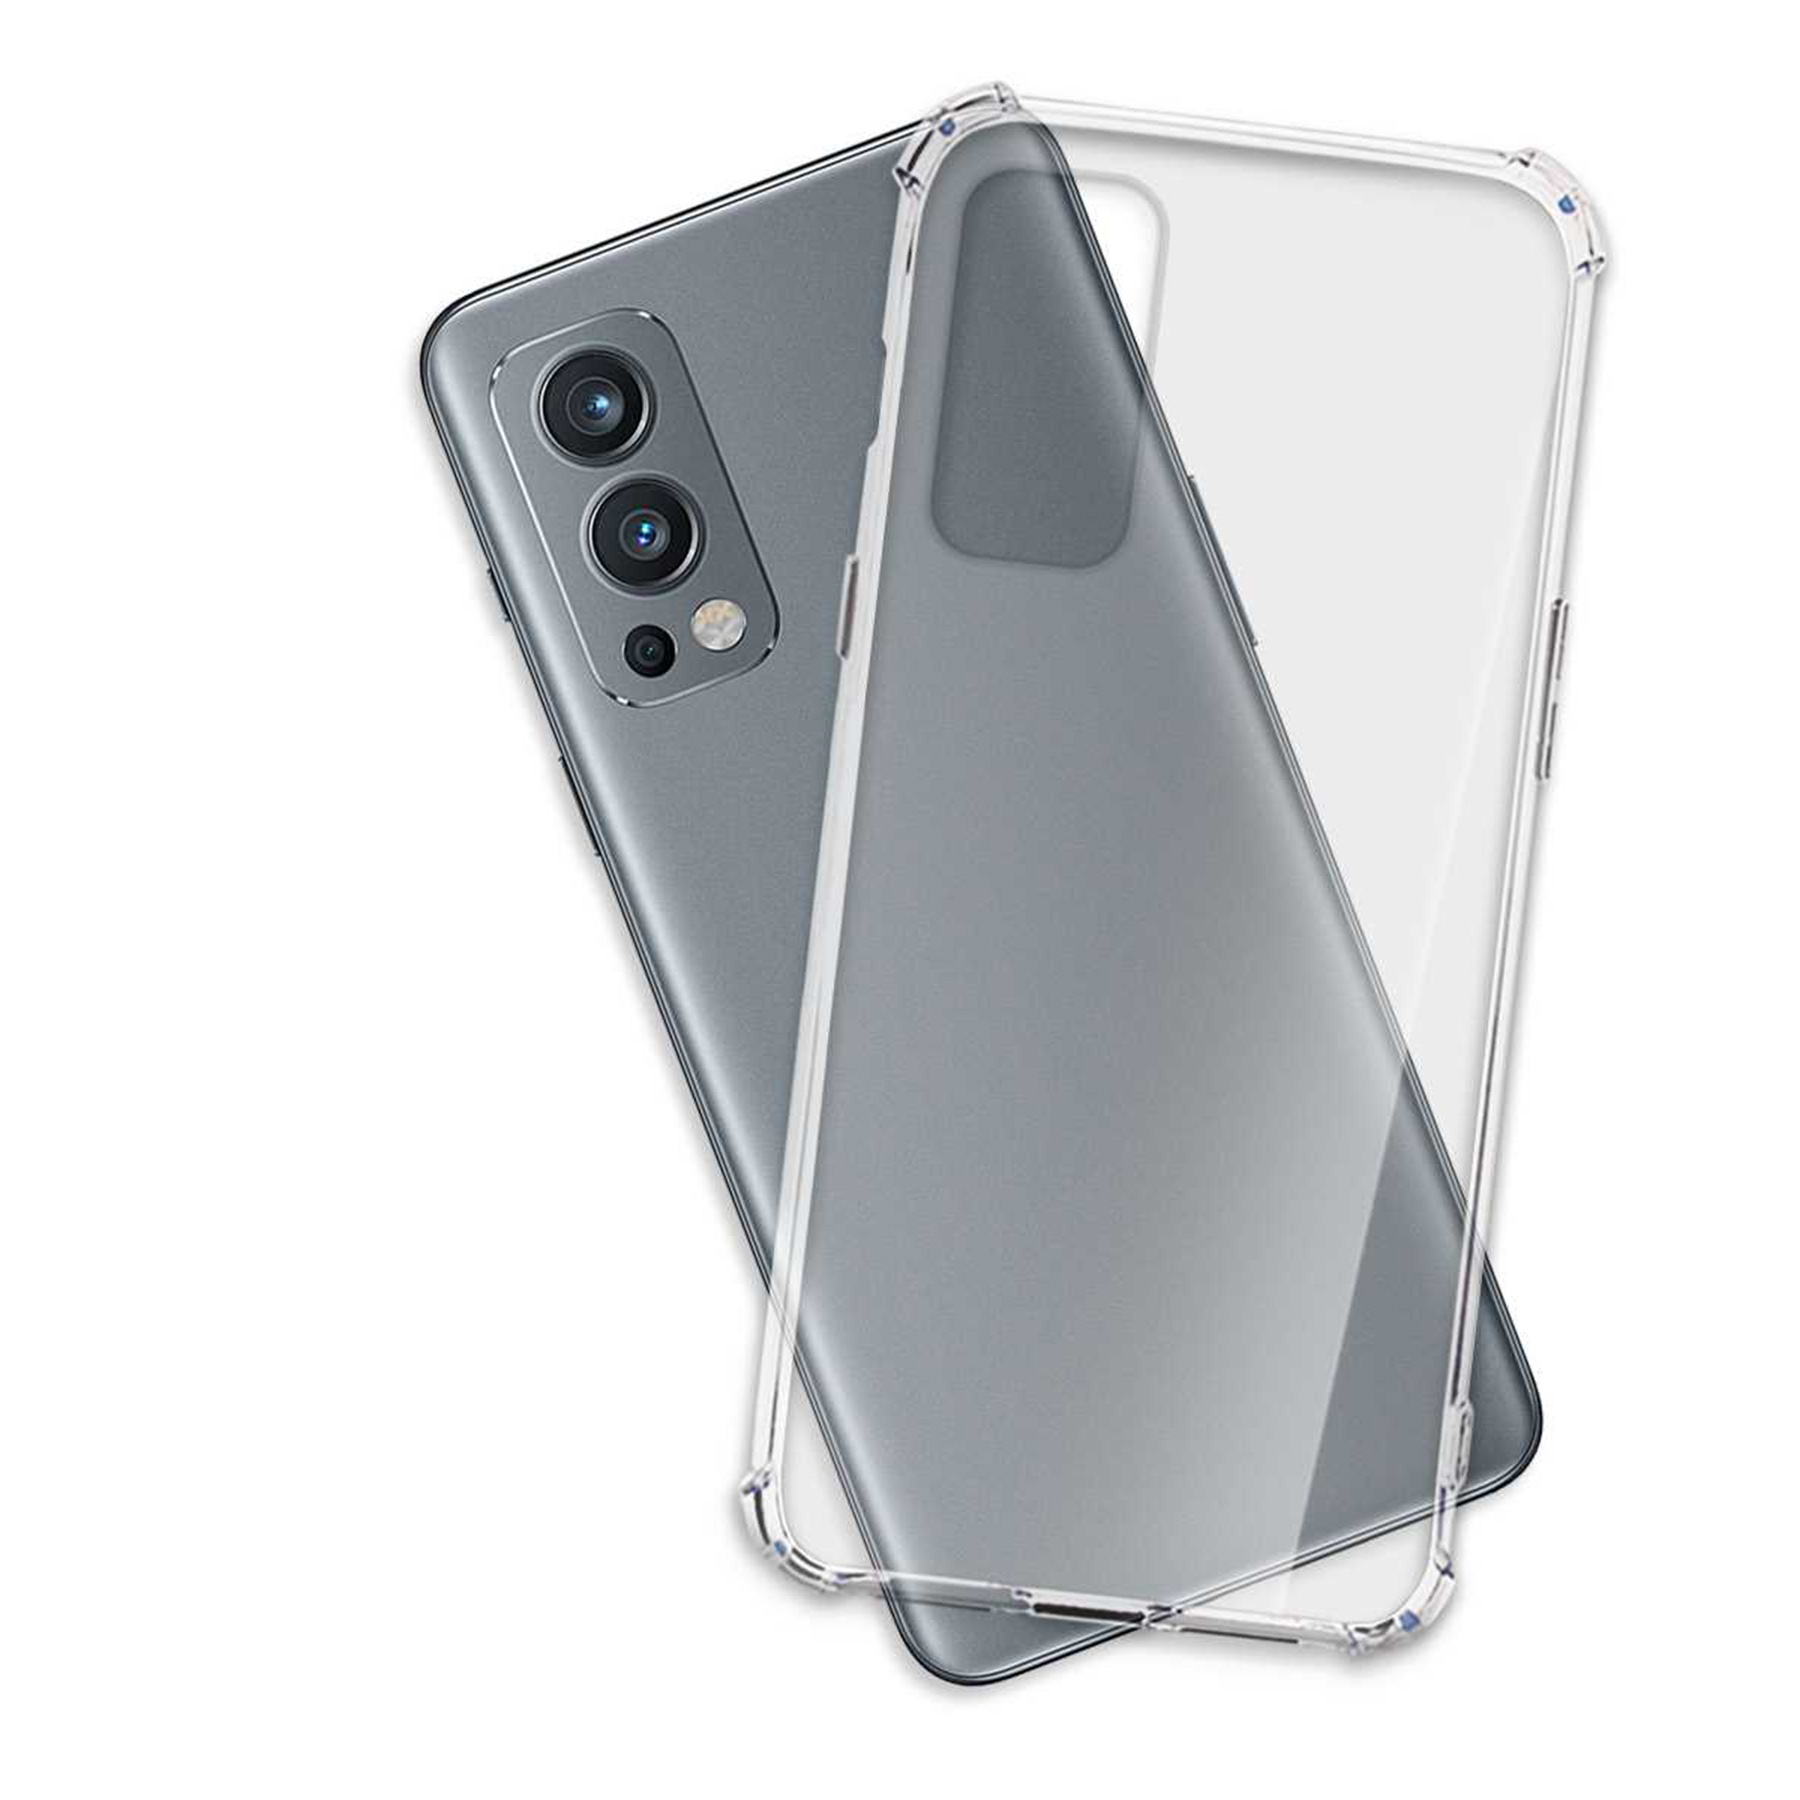 MTB MORE ENERGY Clear Armor Nord 2 5G, Transparent Case, OnePlus, Backcover